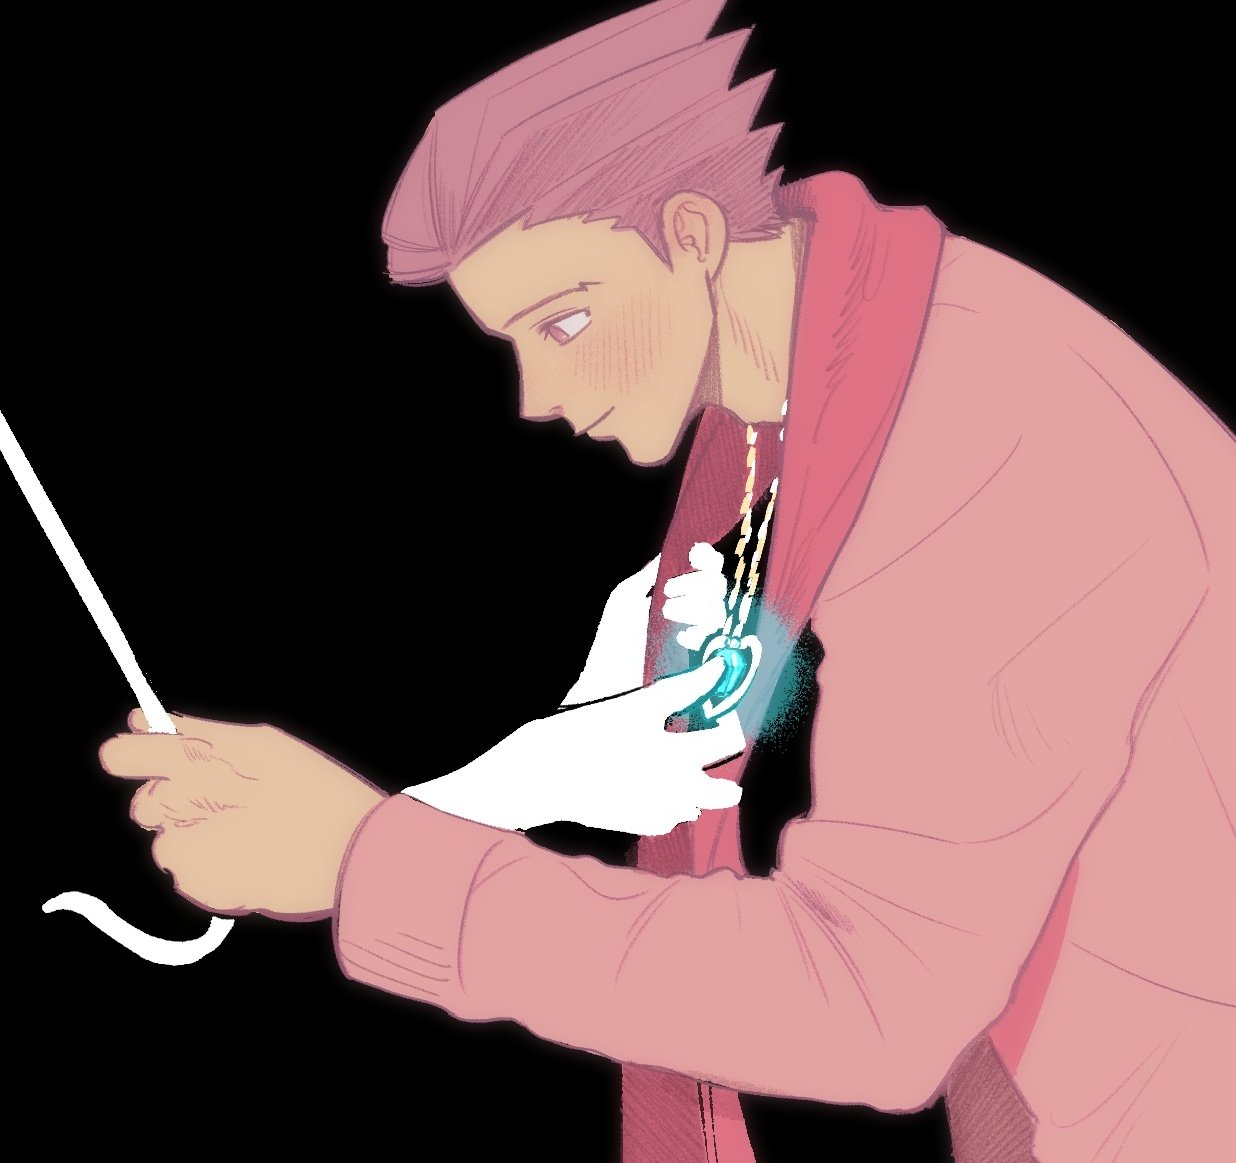 1boy ace_attorney adjusting_scarf black_background blush closed_mouth dahlia_hawthorne from_side glowing heart heart_necklace holding holding_umbrella jewelry leaning_forward long_sleeves looking_down male_focus necklace phoenix_wright pink_sweater profile red_scarf scarf short_hair simple_background smile spiky_hair sweater umbrella upper_body yon13498812